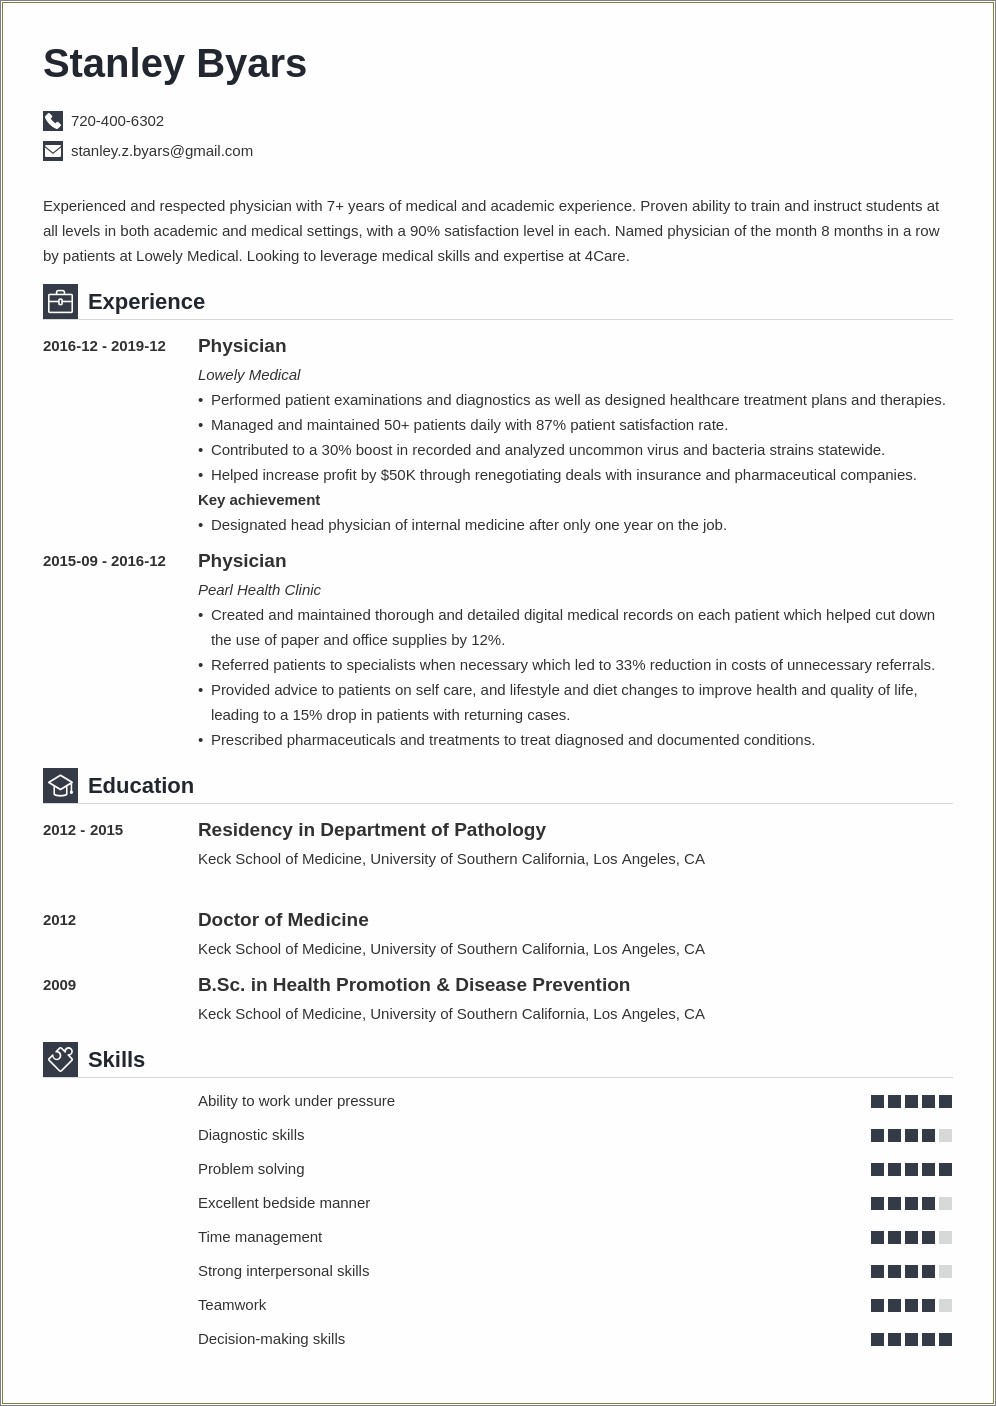 Sample Theology And Doctor Of Medicine Resume